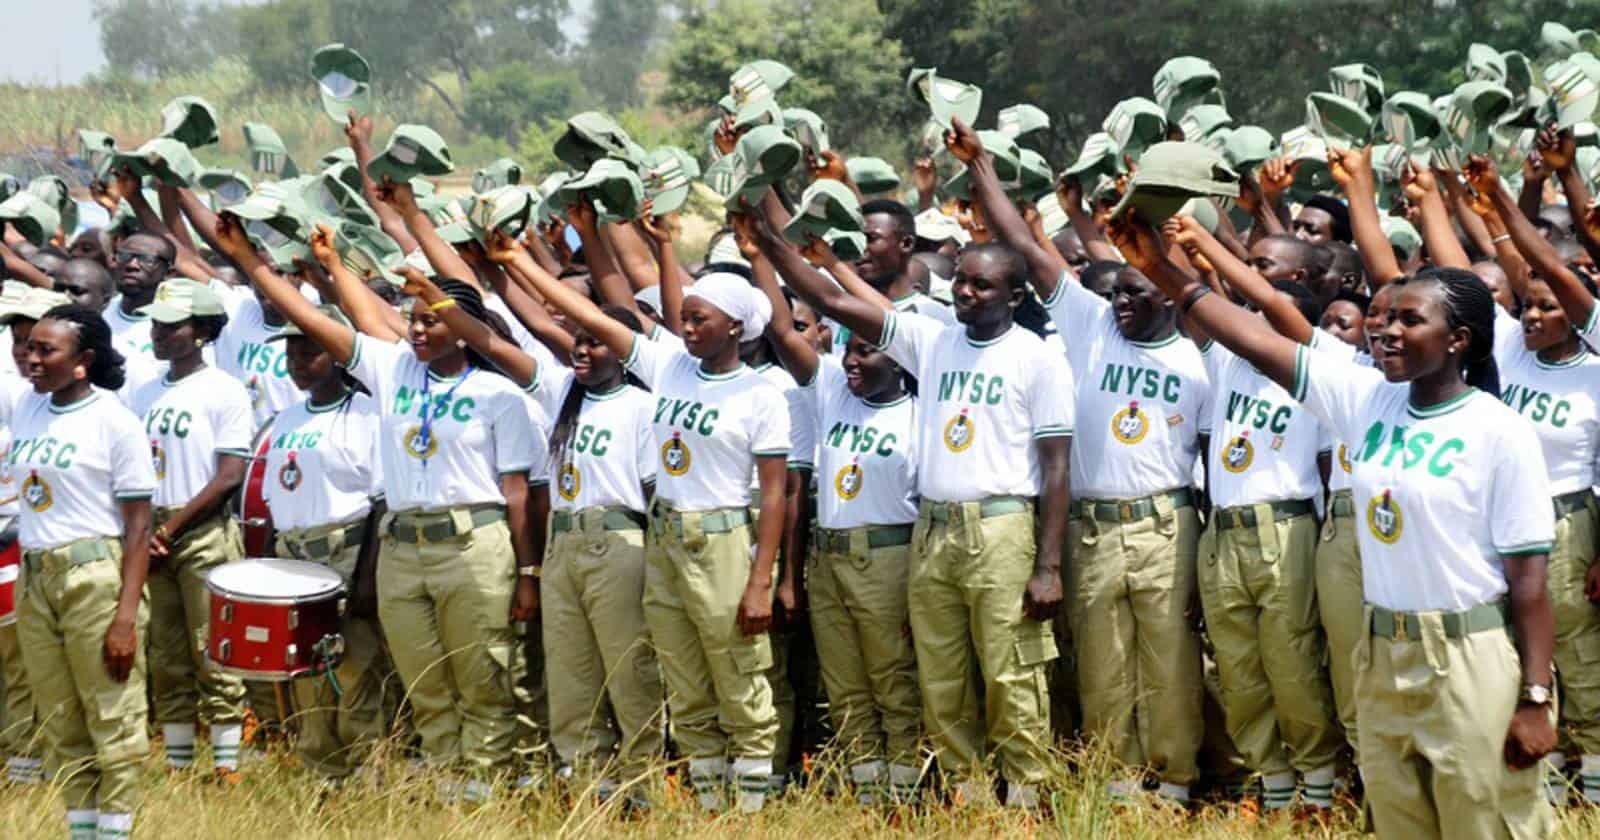 National Service Youth Corps (NYSC) Accredited Registration Centres